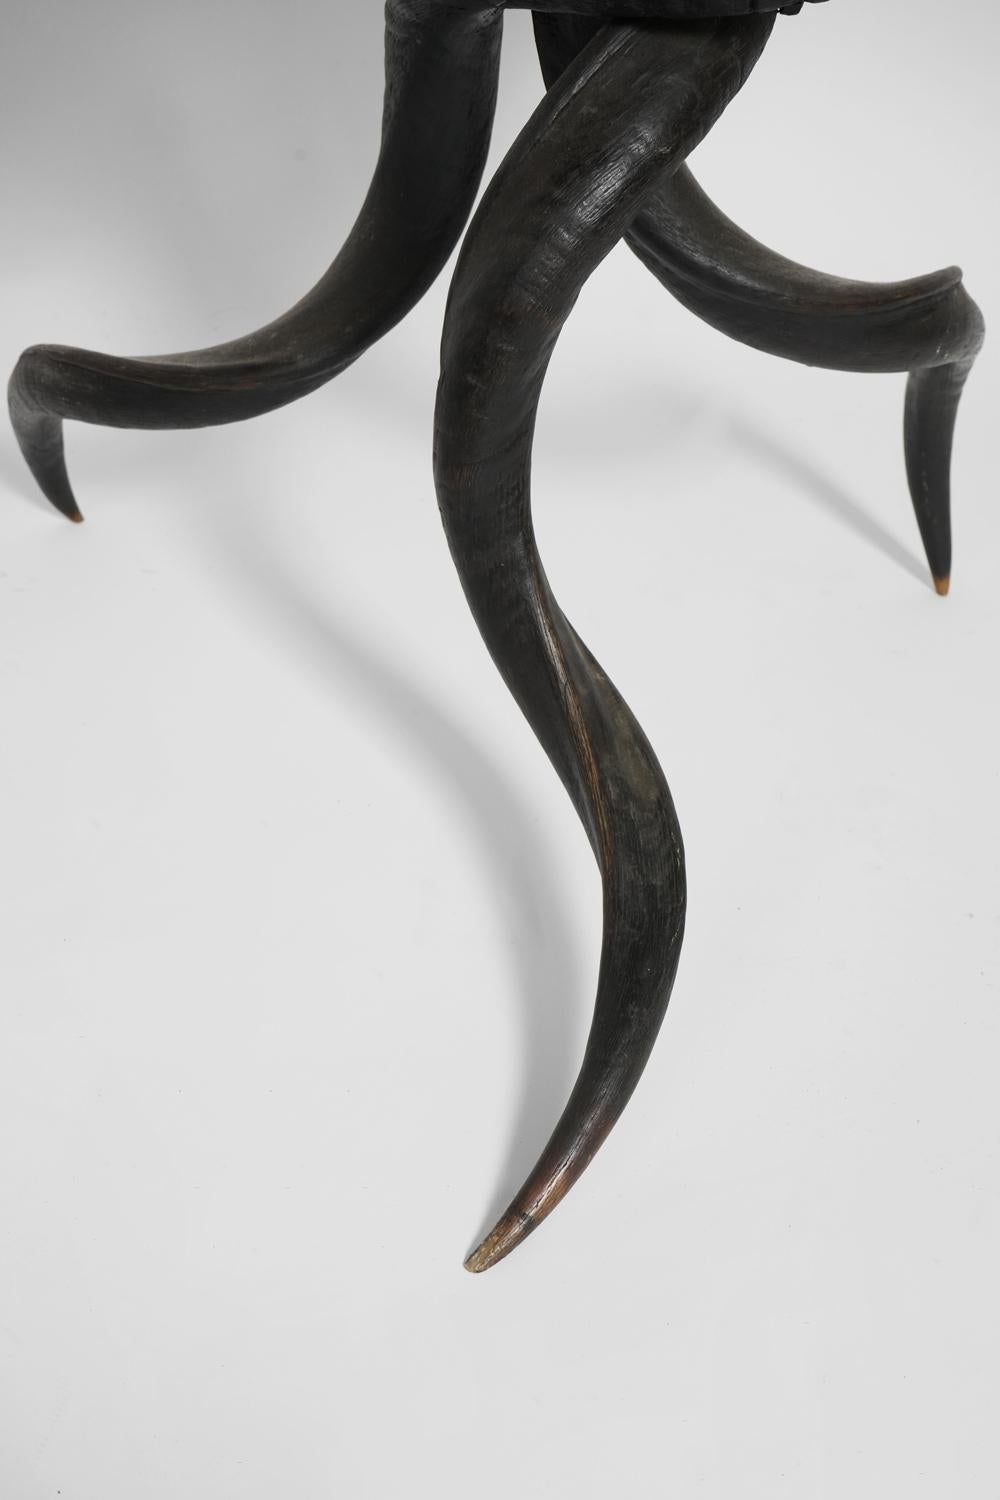 Portuguese table with black horns. Mozambique, 1960s.